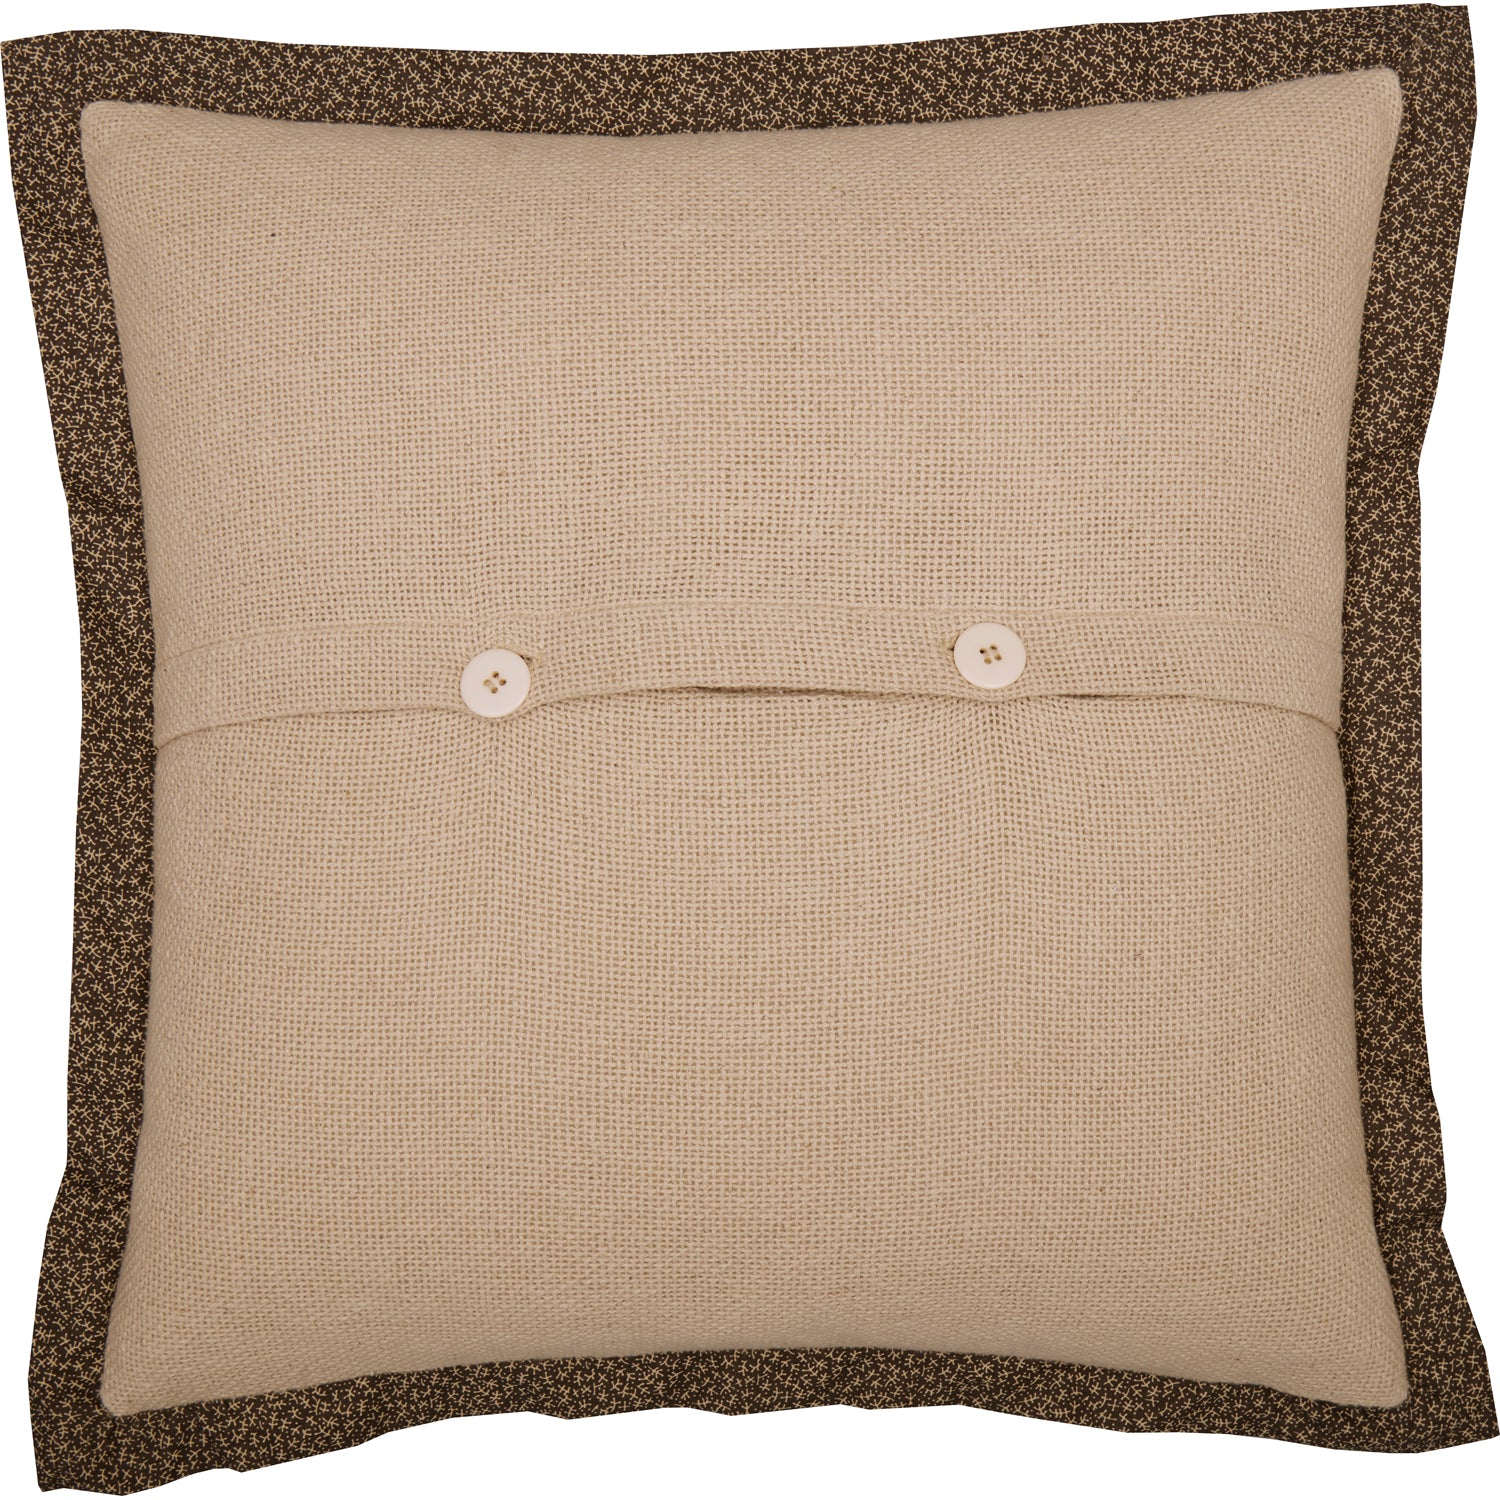 54617-Kettle-Grove-Believe-and-Receive-Pillow-18x18-image-5